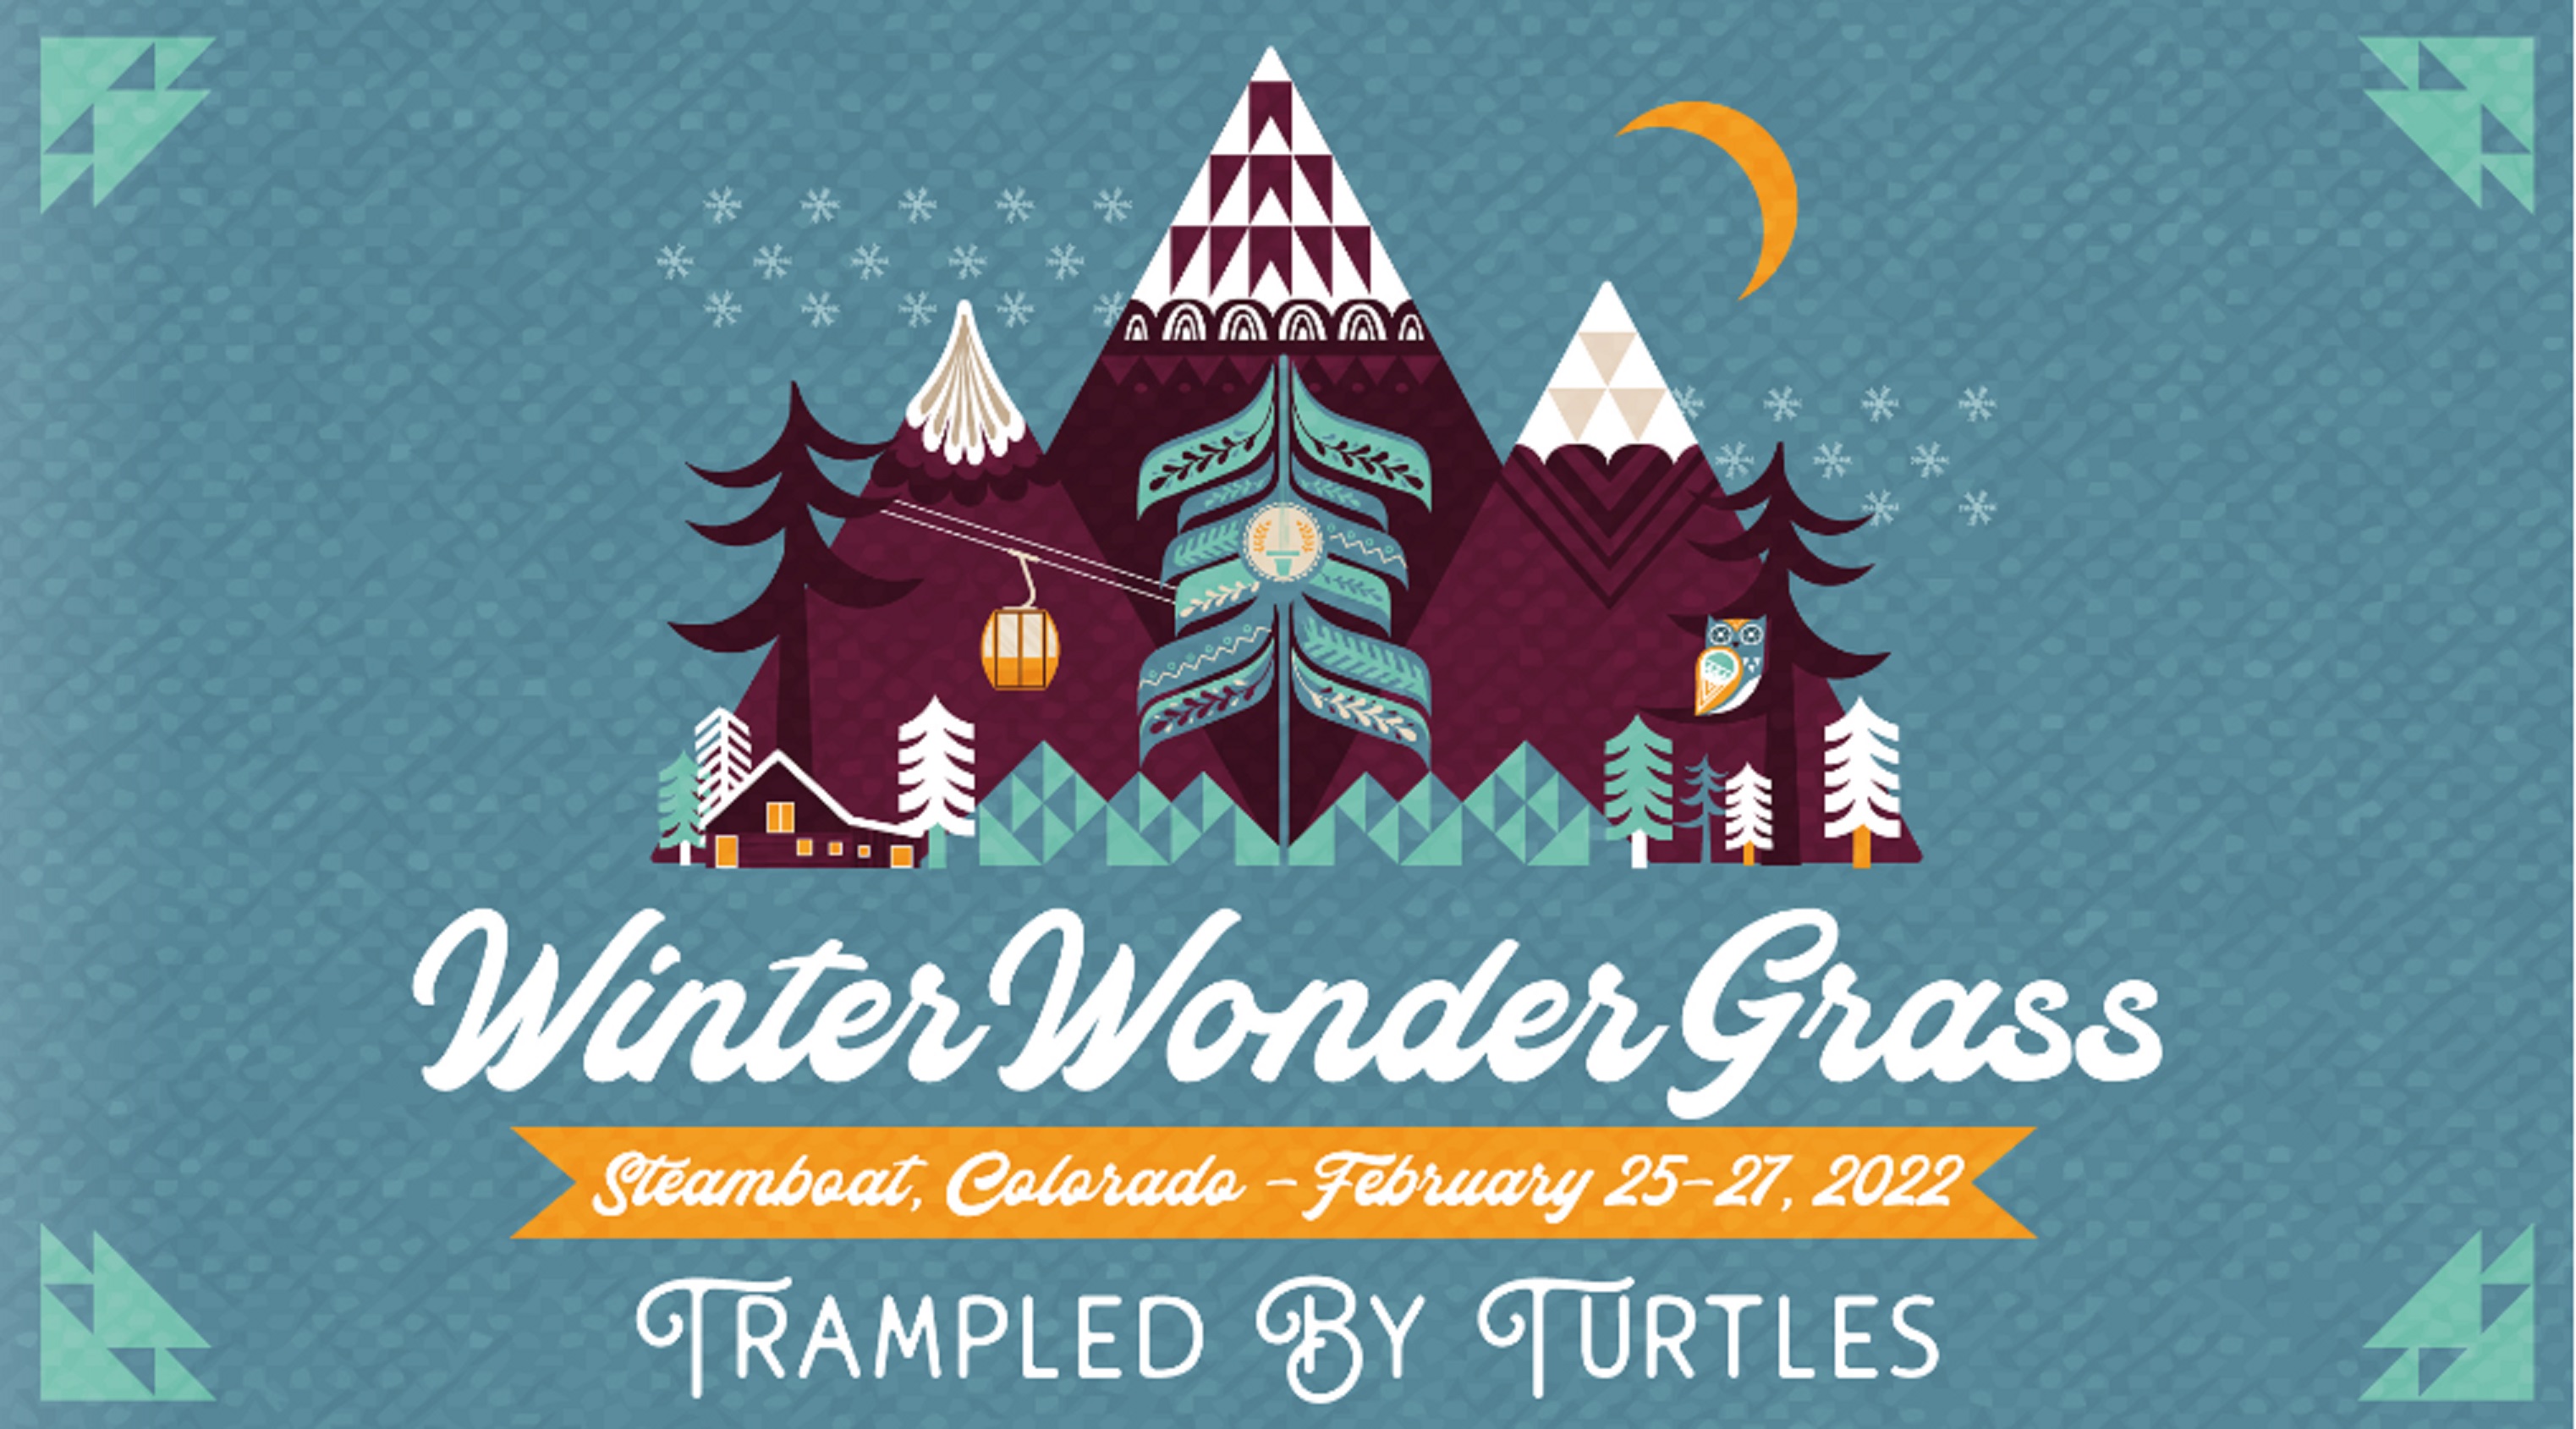 WinterWonderGrass Announces Trampled by Turtles as First Steamboat 2022 Headliner